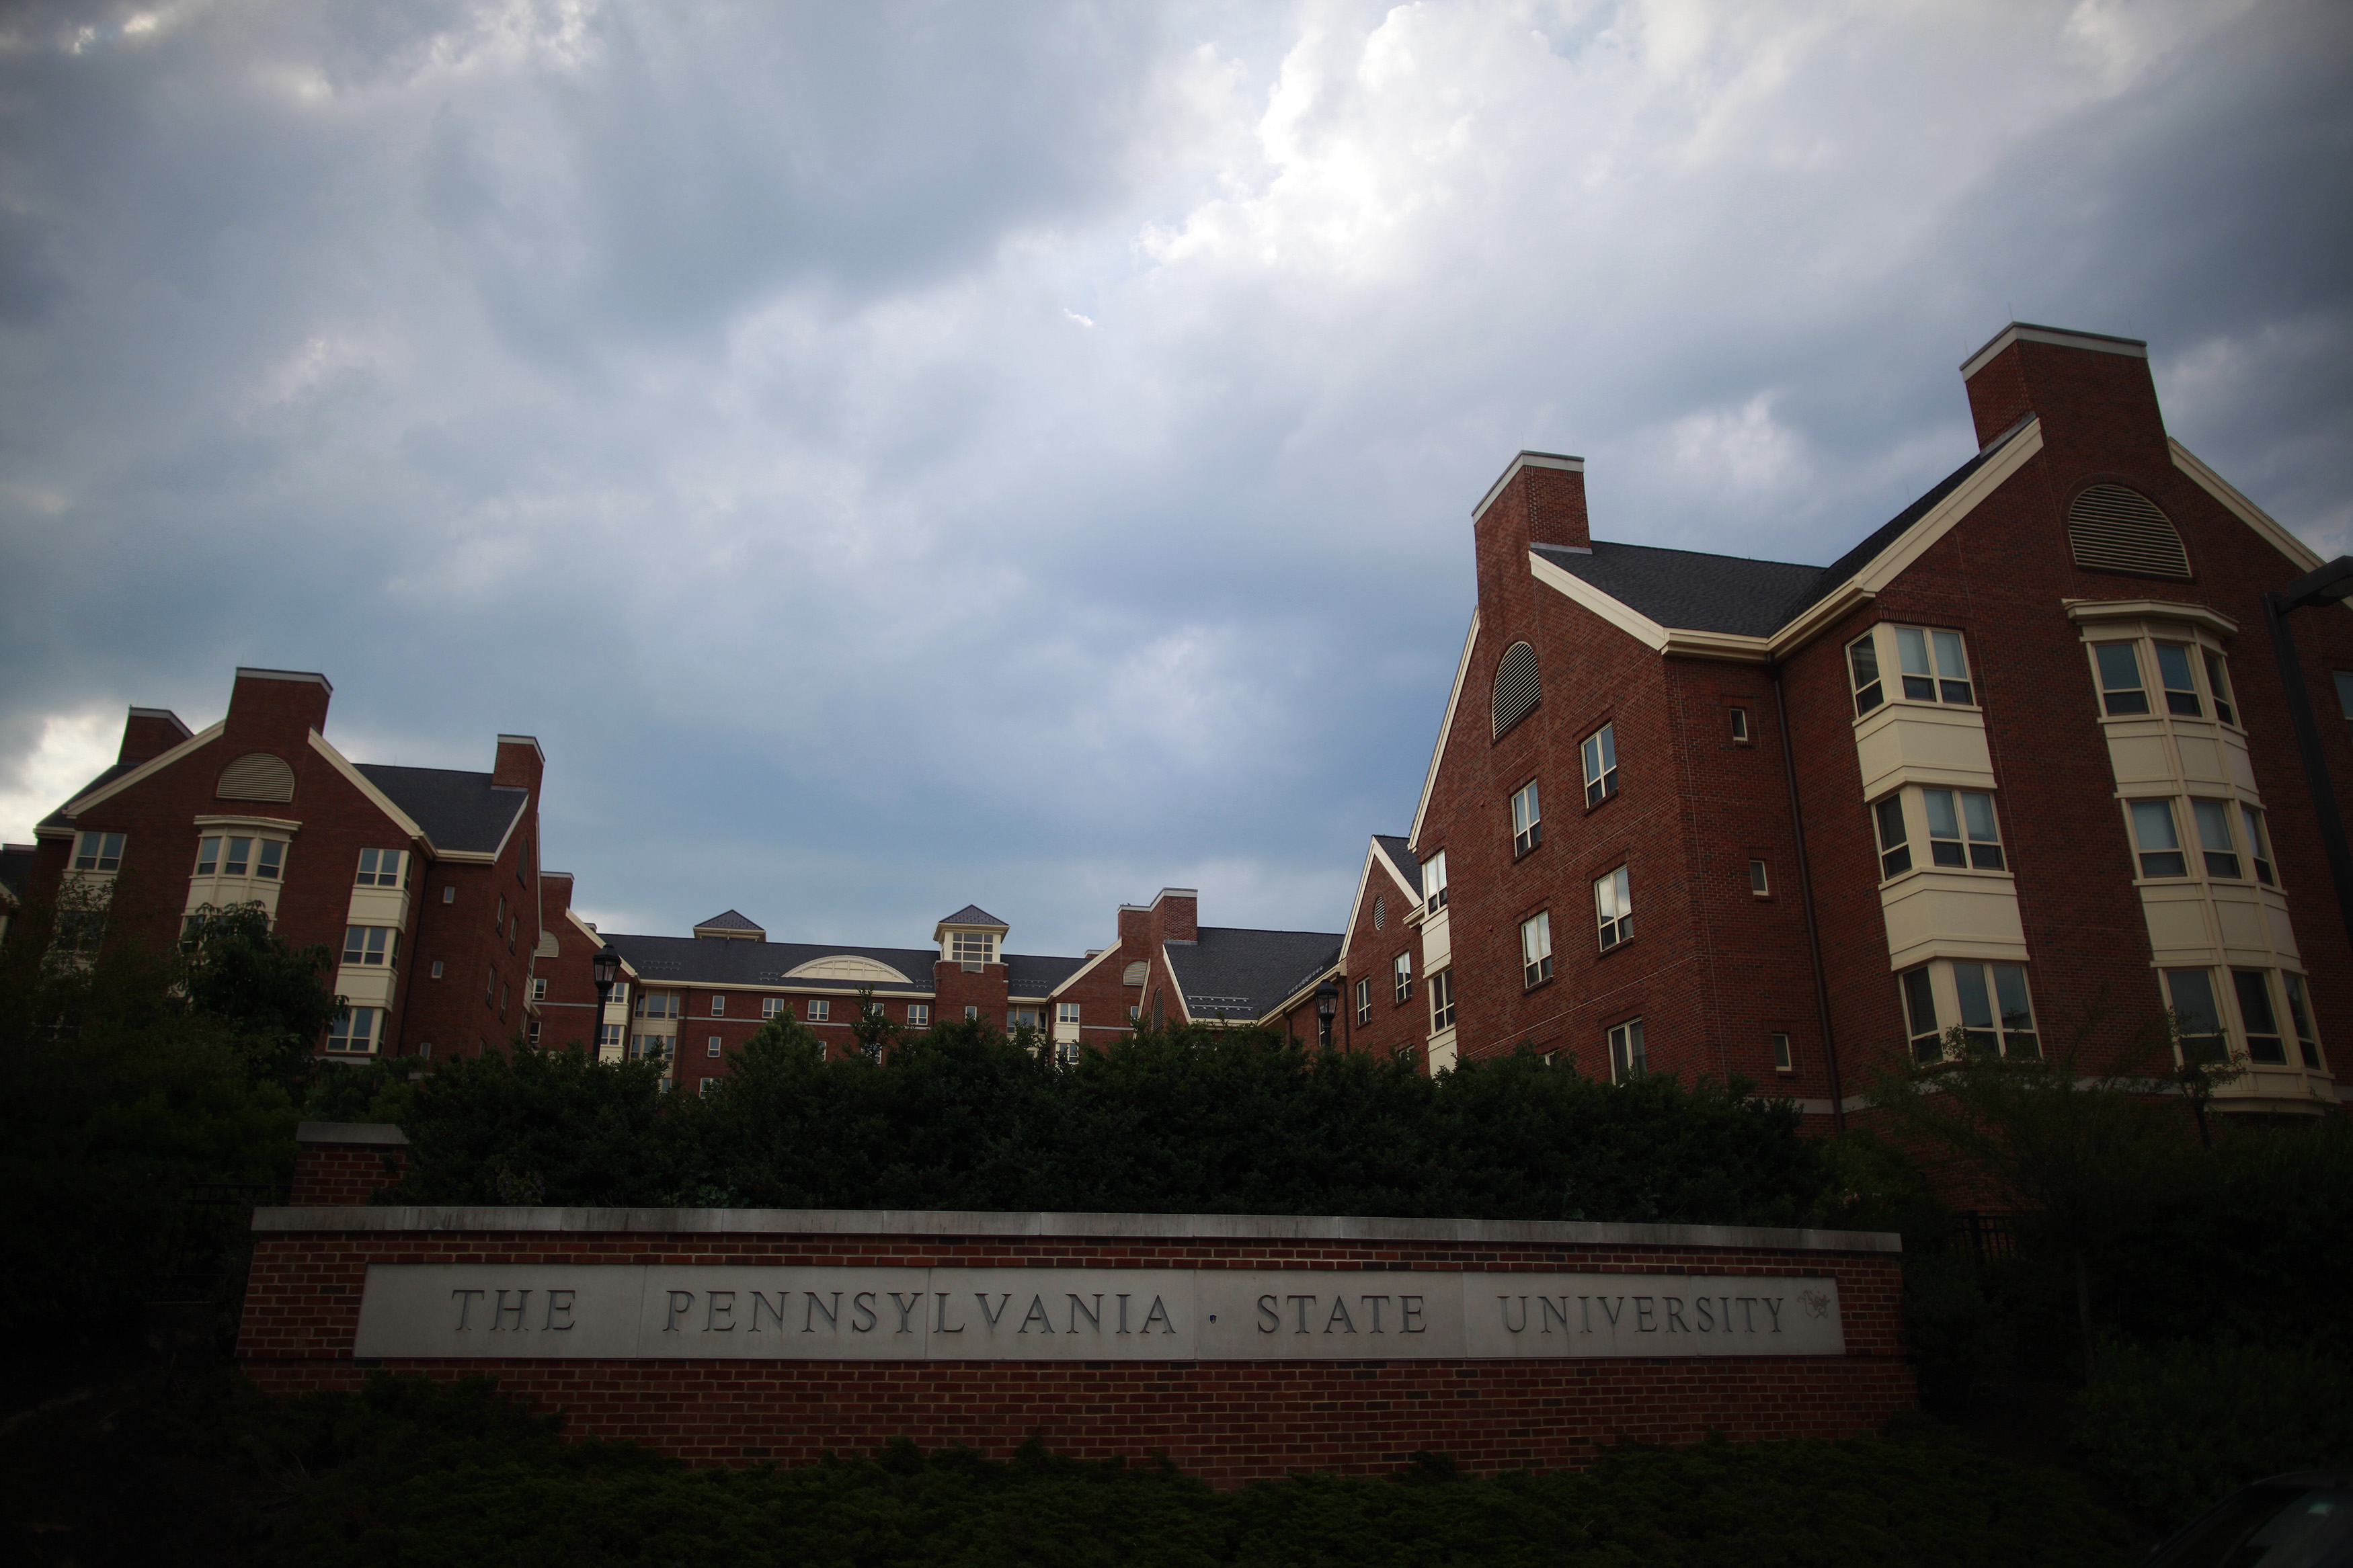 A view of the buildings on the campus of Pennsylvania State University in State College, Pennsylvania July 11, 2012. REUTERS/Eric Thayer (UNITED STATES - Tags: EDUCATION SOCIETY)